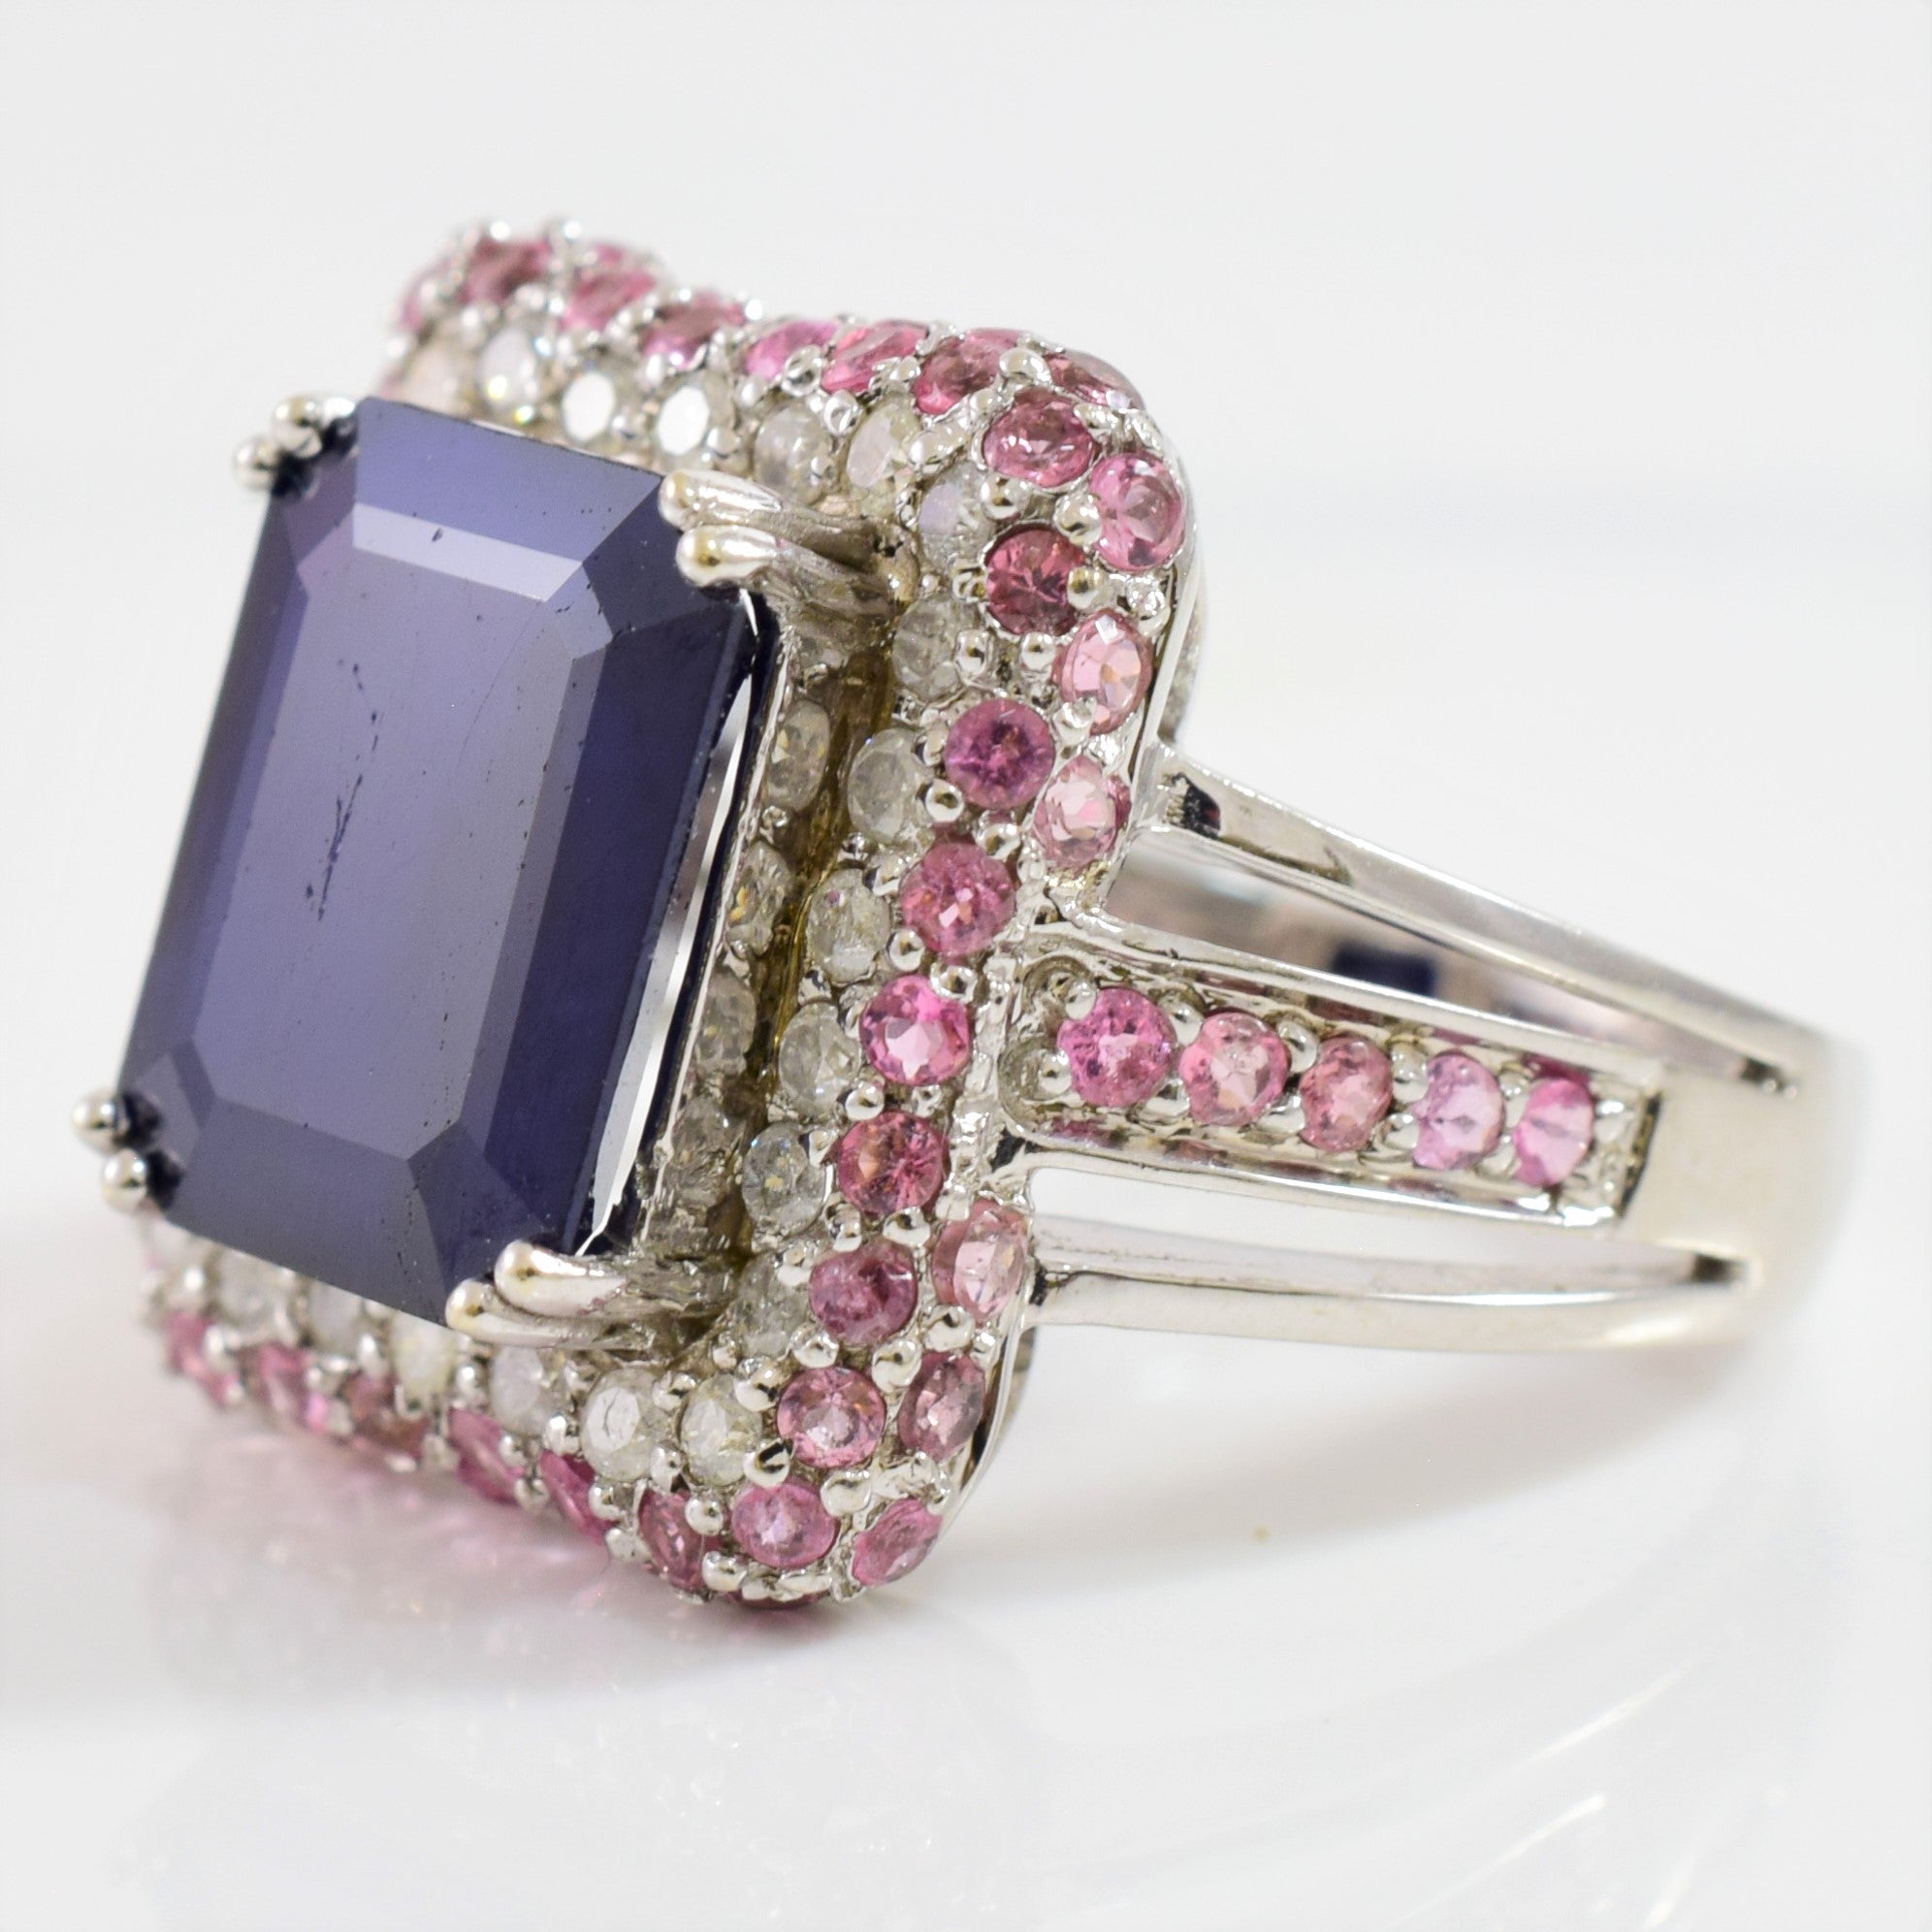 Prong Set Sapphire Ring with Diamond and Tourmaline Cluster | 0.50 ctw SZ 7.25 |